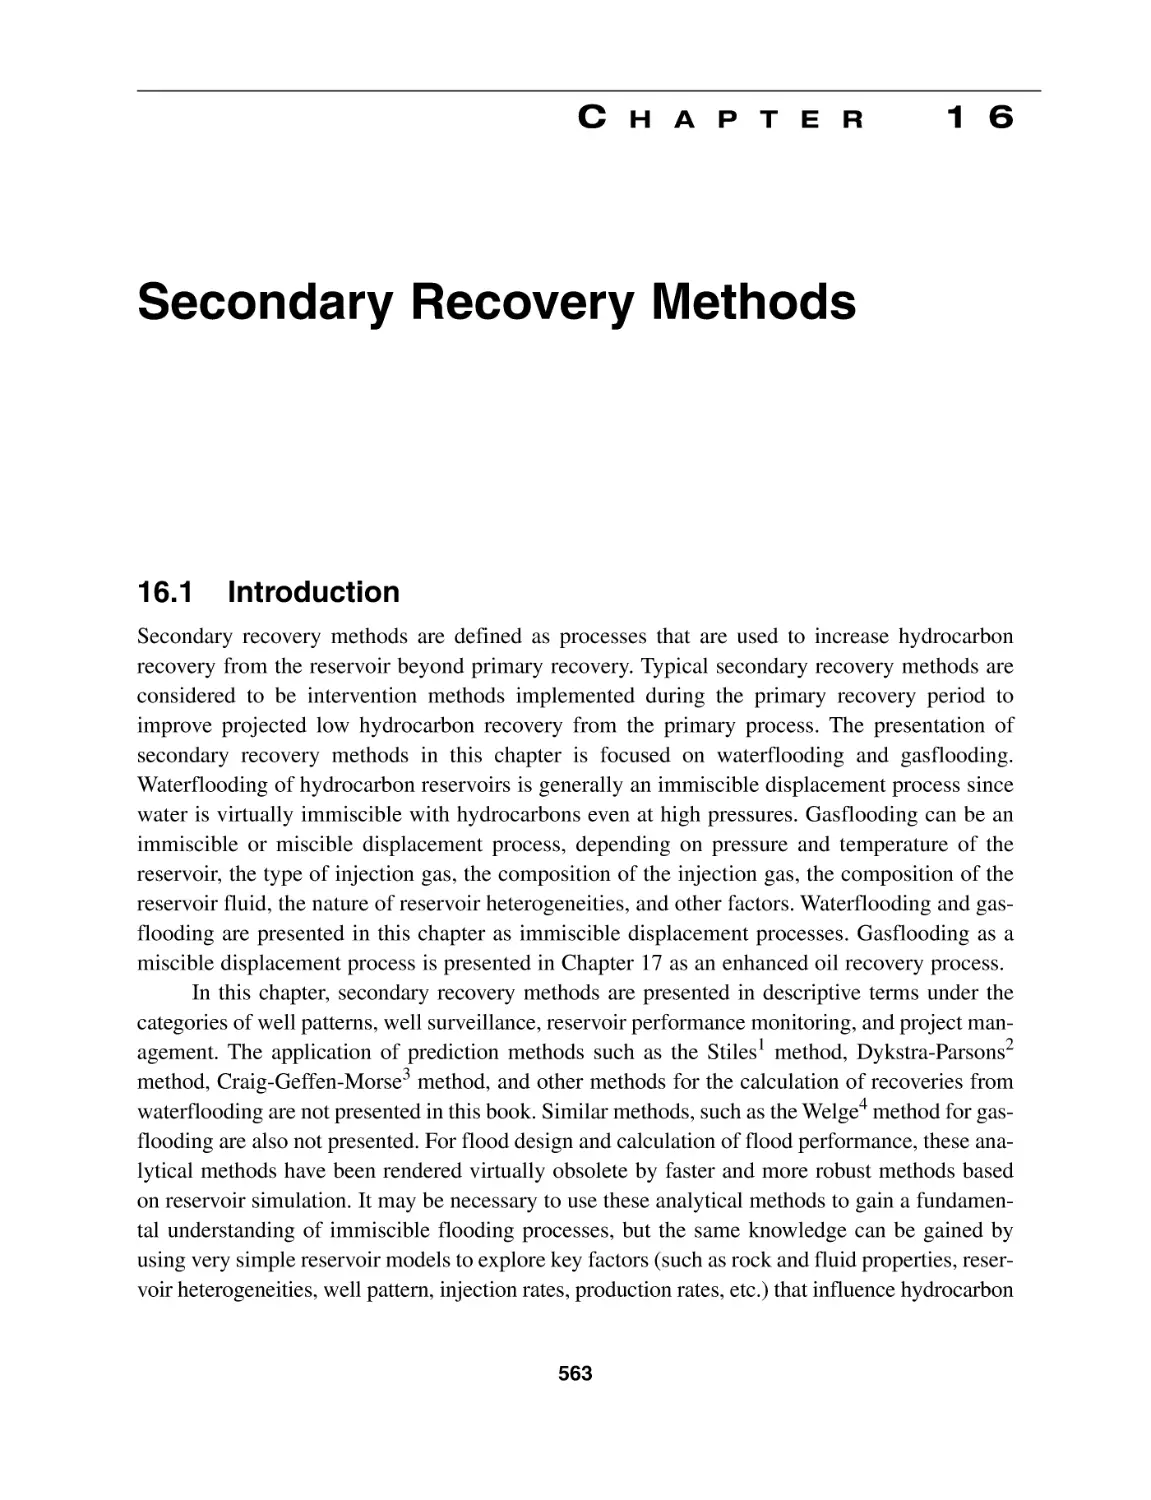 Chapter 16 Secondary Recovery Methods
16.1 Introduction